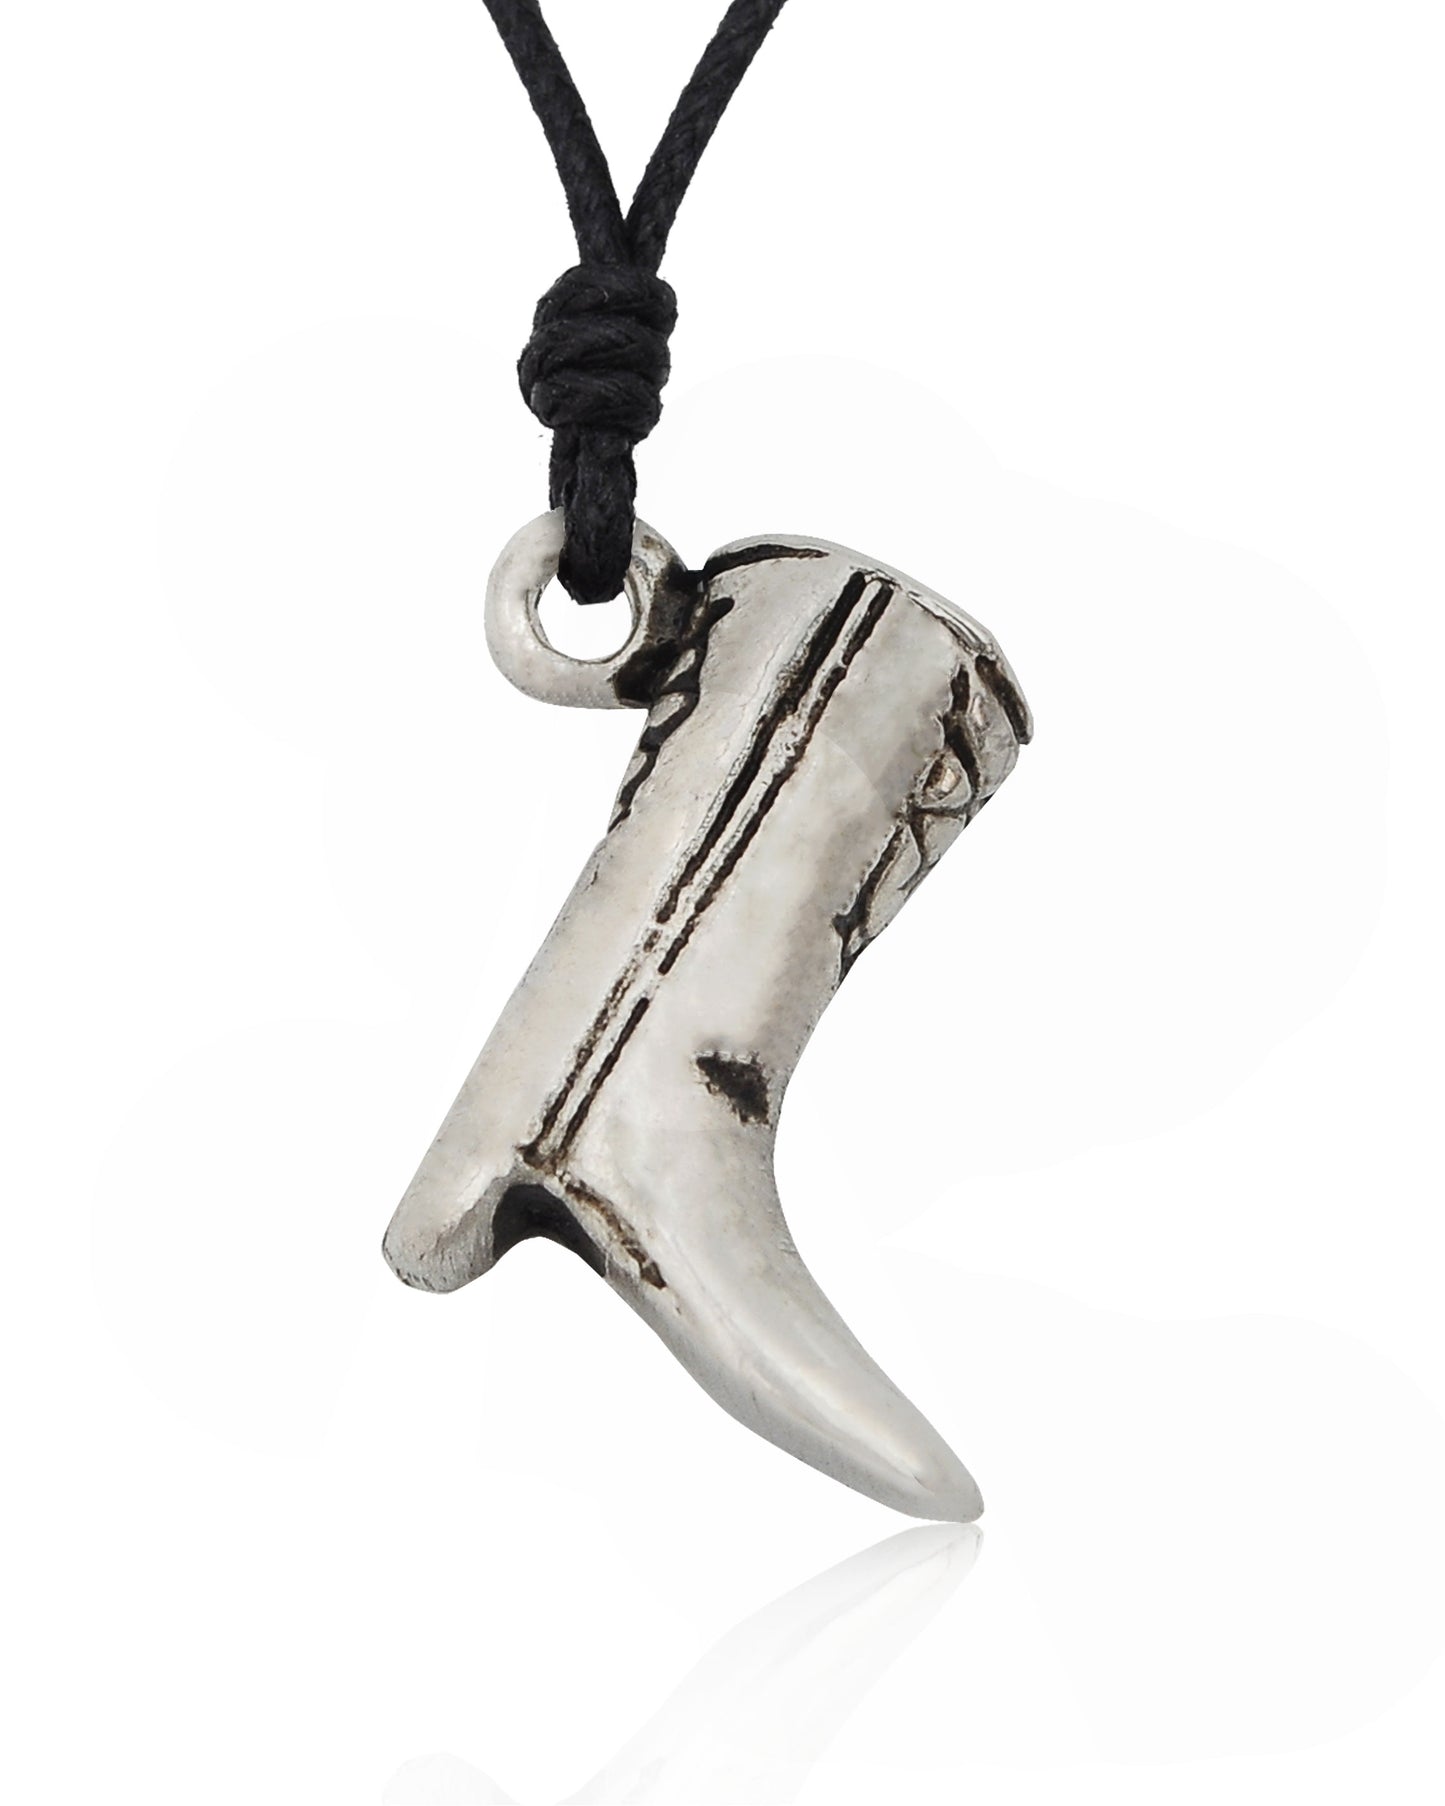 Cowboy Boot Shoe Charm  Silver Pewter Charm Necklace Pendant Jewelry With Cotton Cord